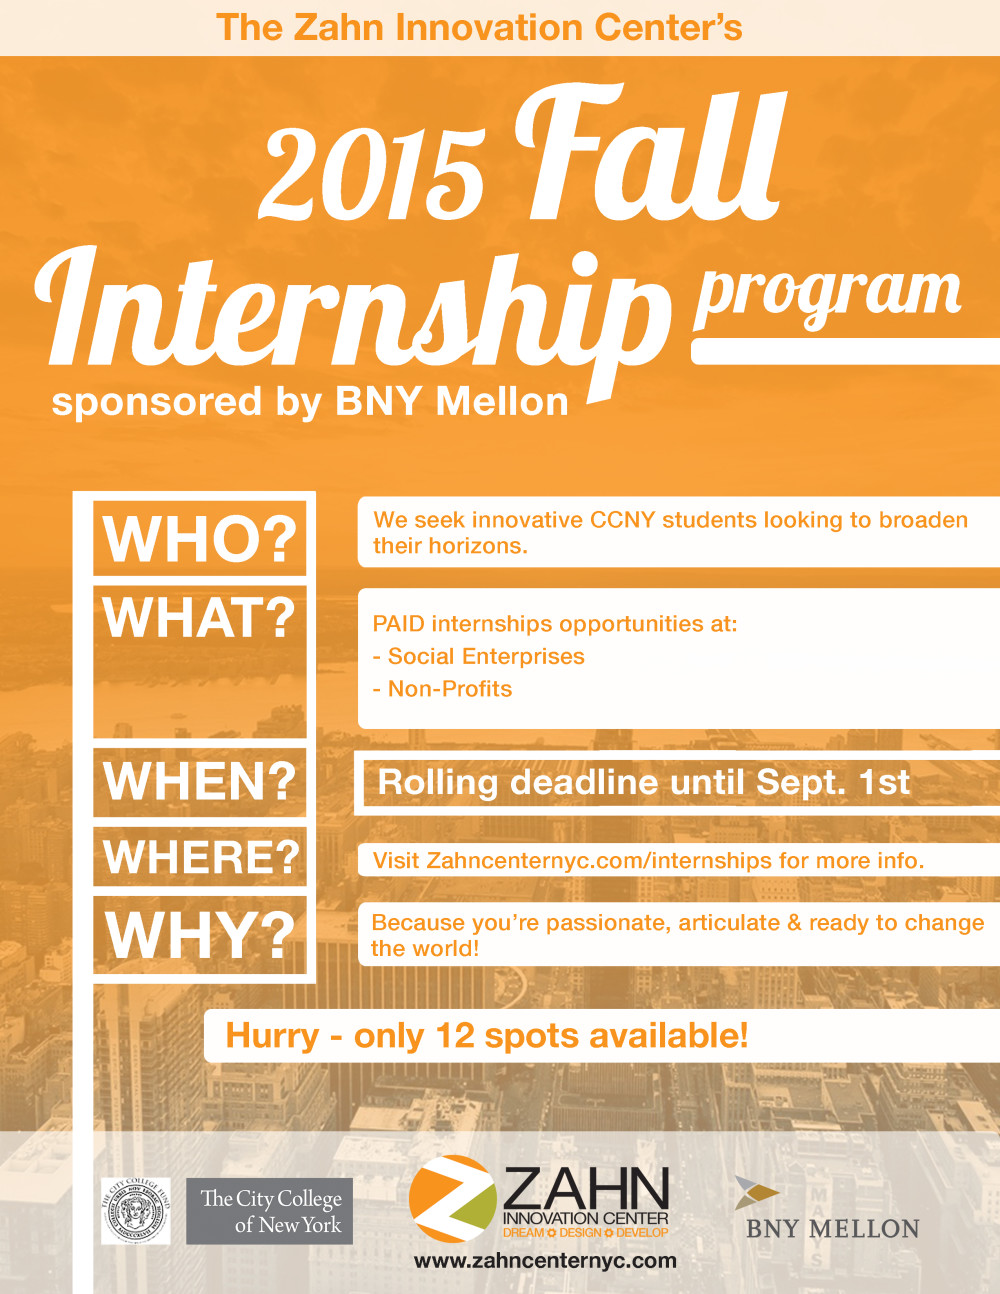 Apply Now for Fall Internships! The City College of New York